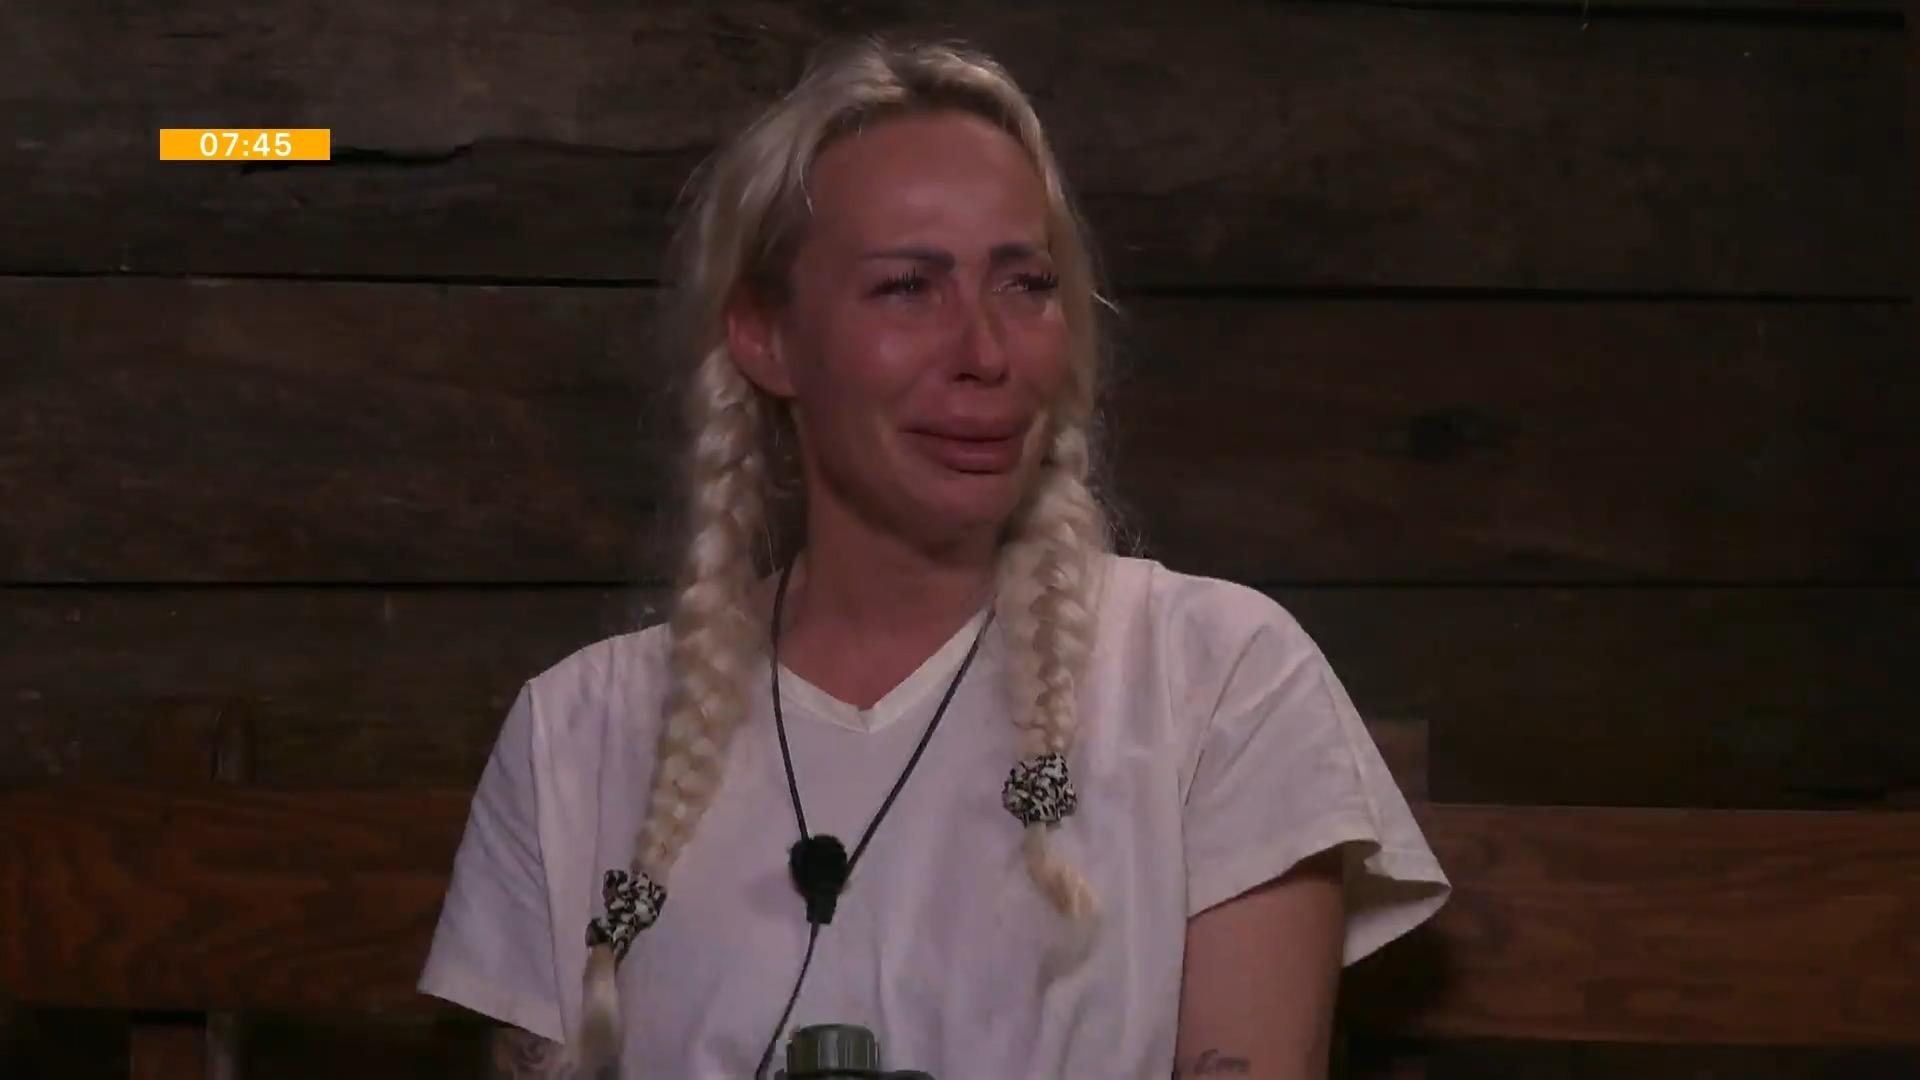 Cora Schumacher in tears: “I can’t take it anymore!”